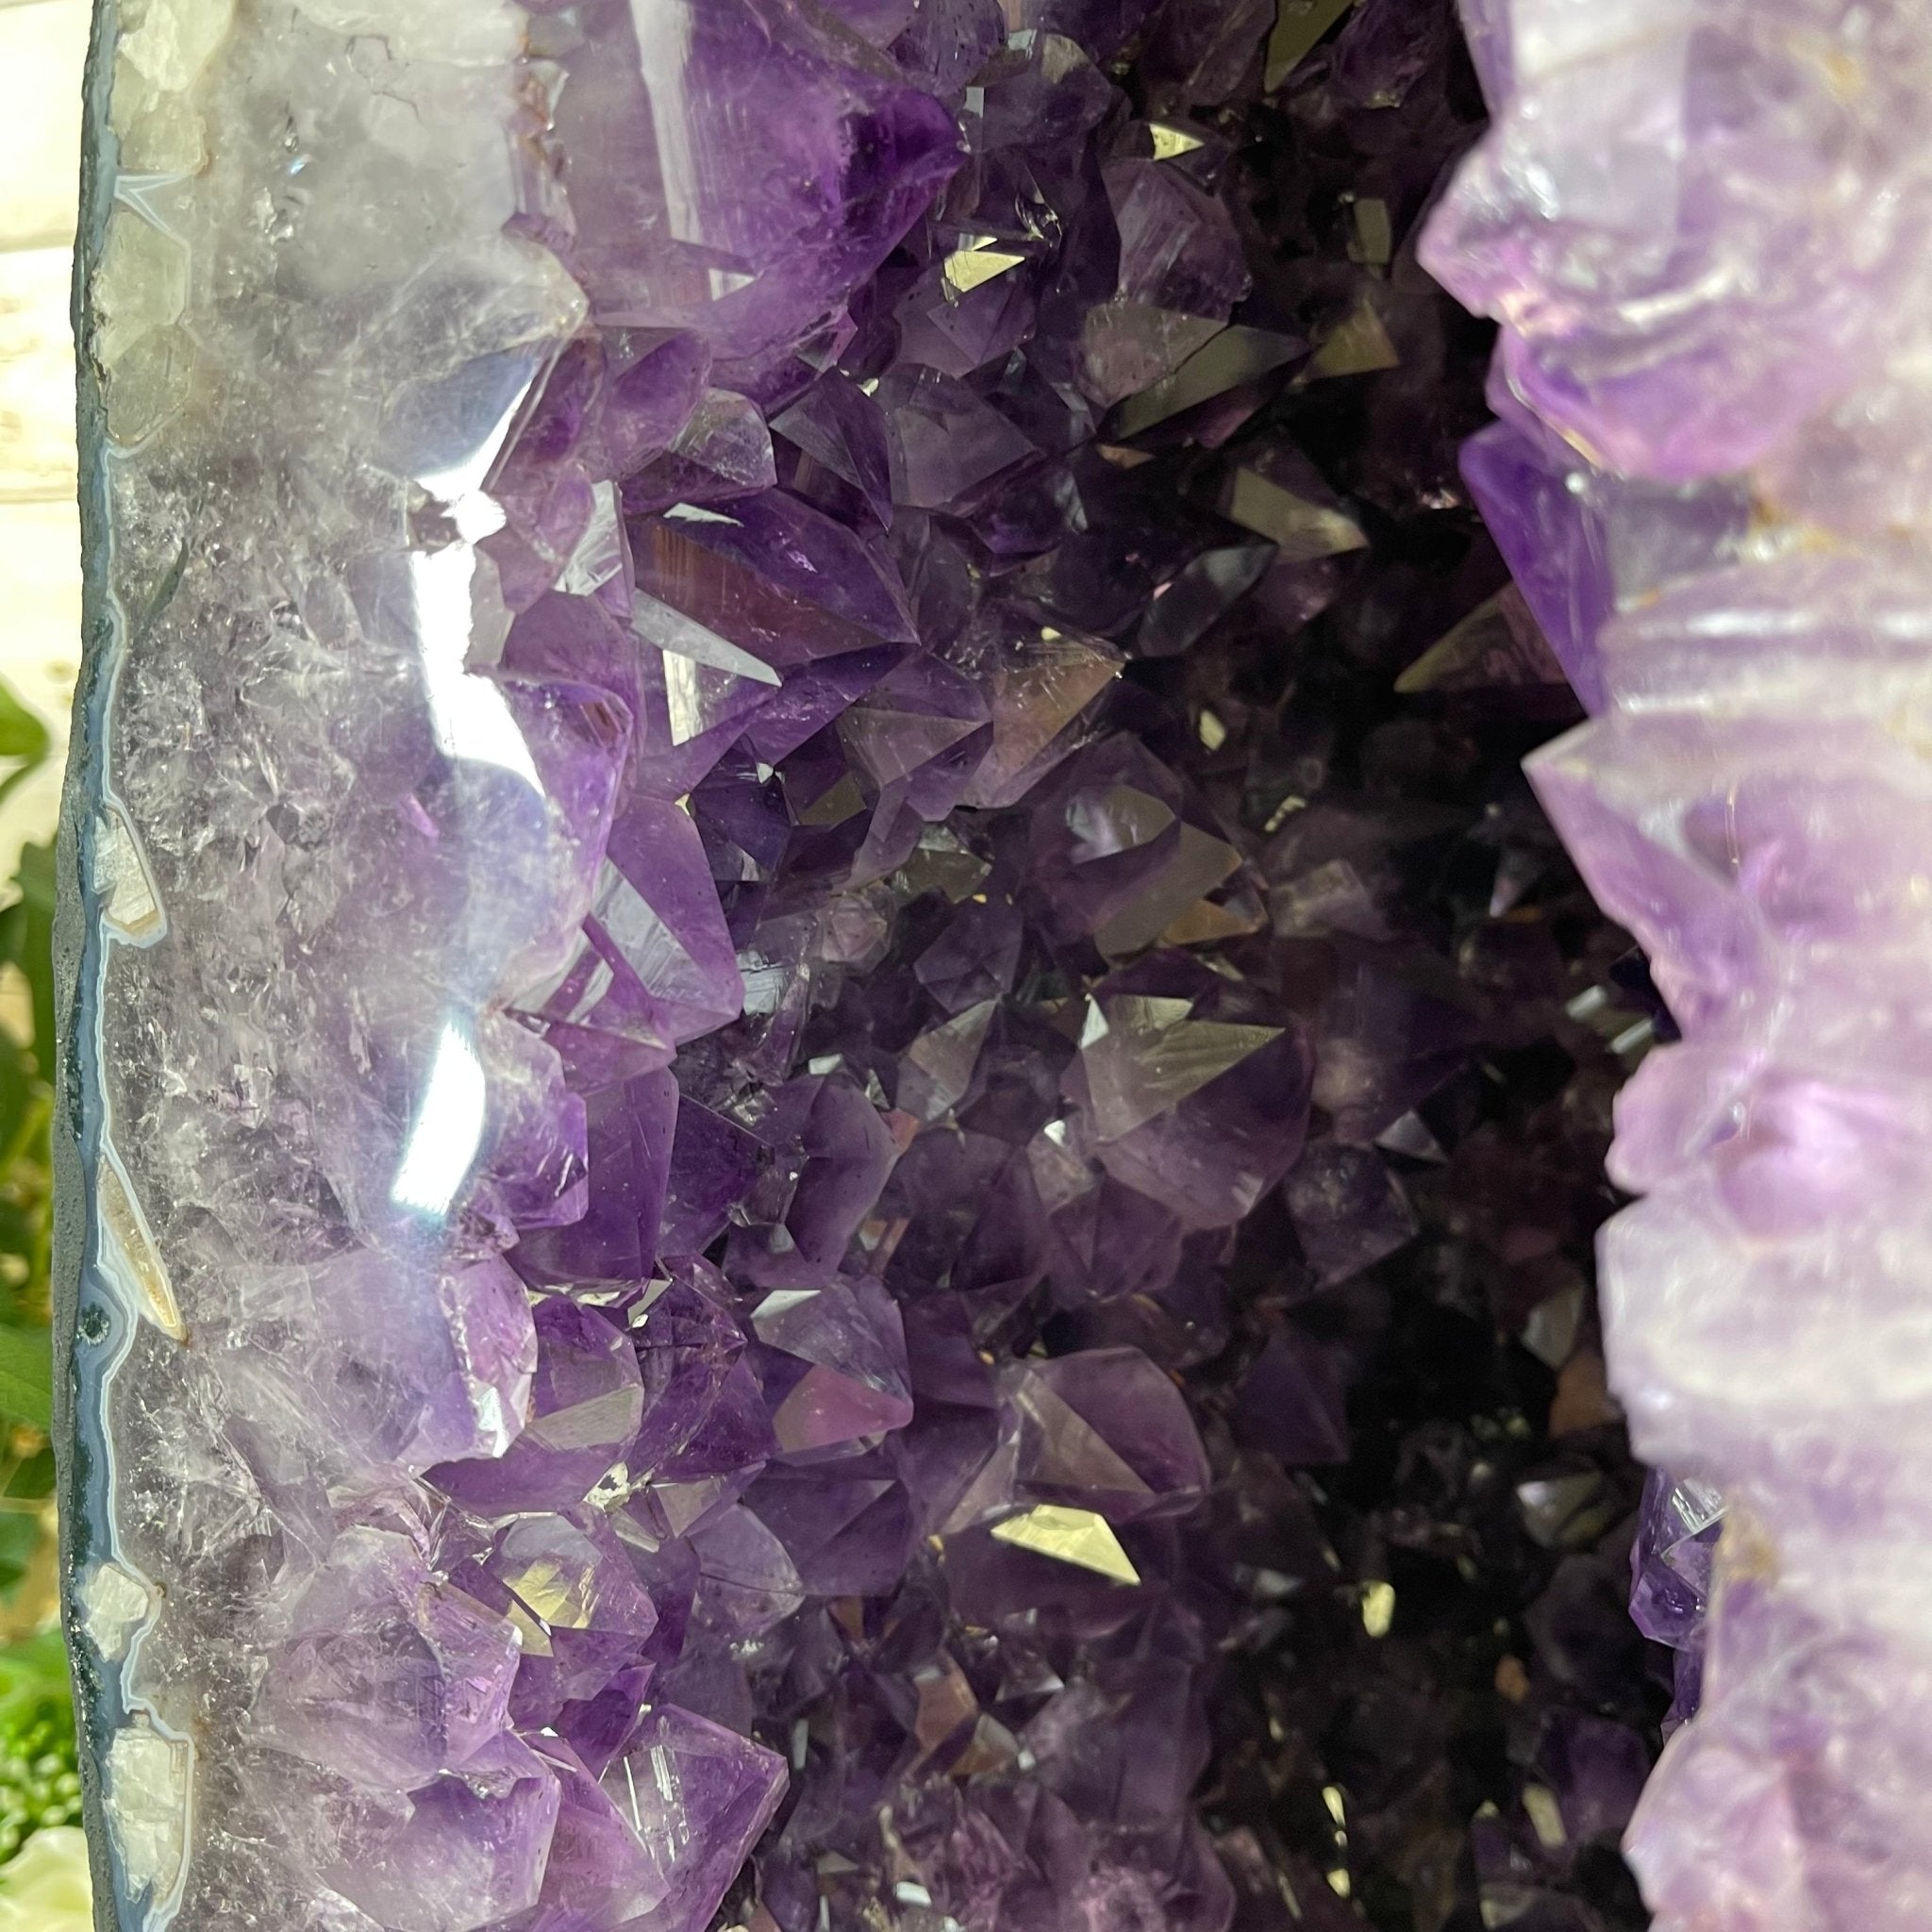 Extra Quality Brazilian Amethyst Cathedral, 125.7 lbs & 29.75" Tall #5601-0711 by Brazil Gems - Brazil GemsBrazil GemsExtra Quality Brazilian Amethyst Cathedral, 125.7 lbs & 29.75" Tall #5601-0711 by Brazil GemsCathedrals5601-0711